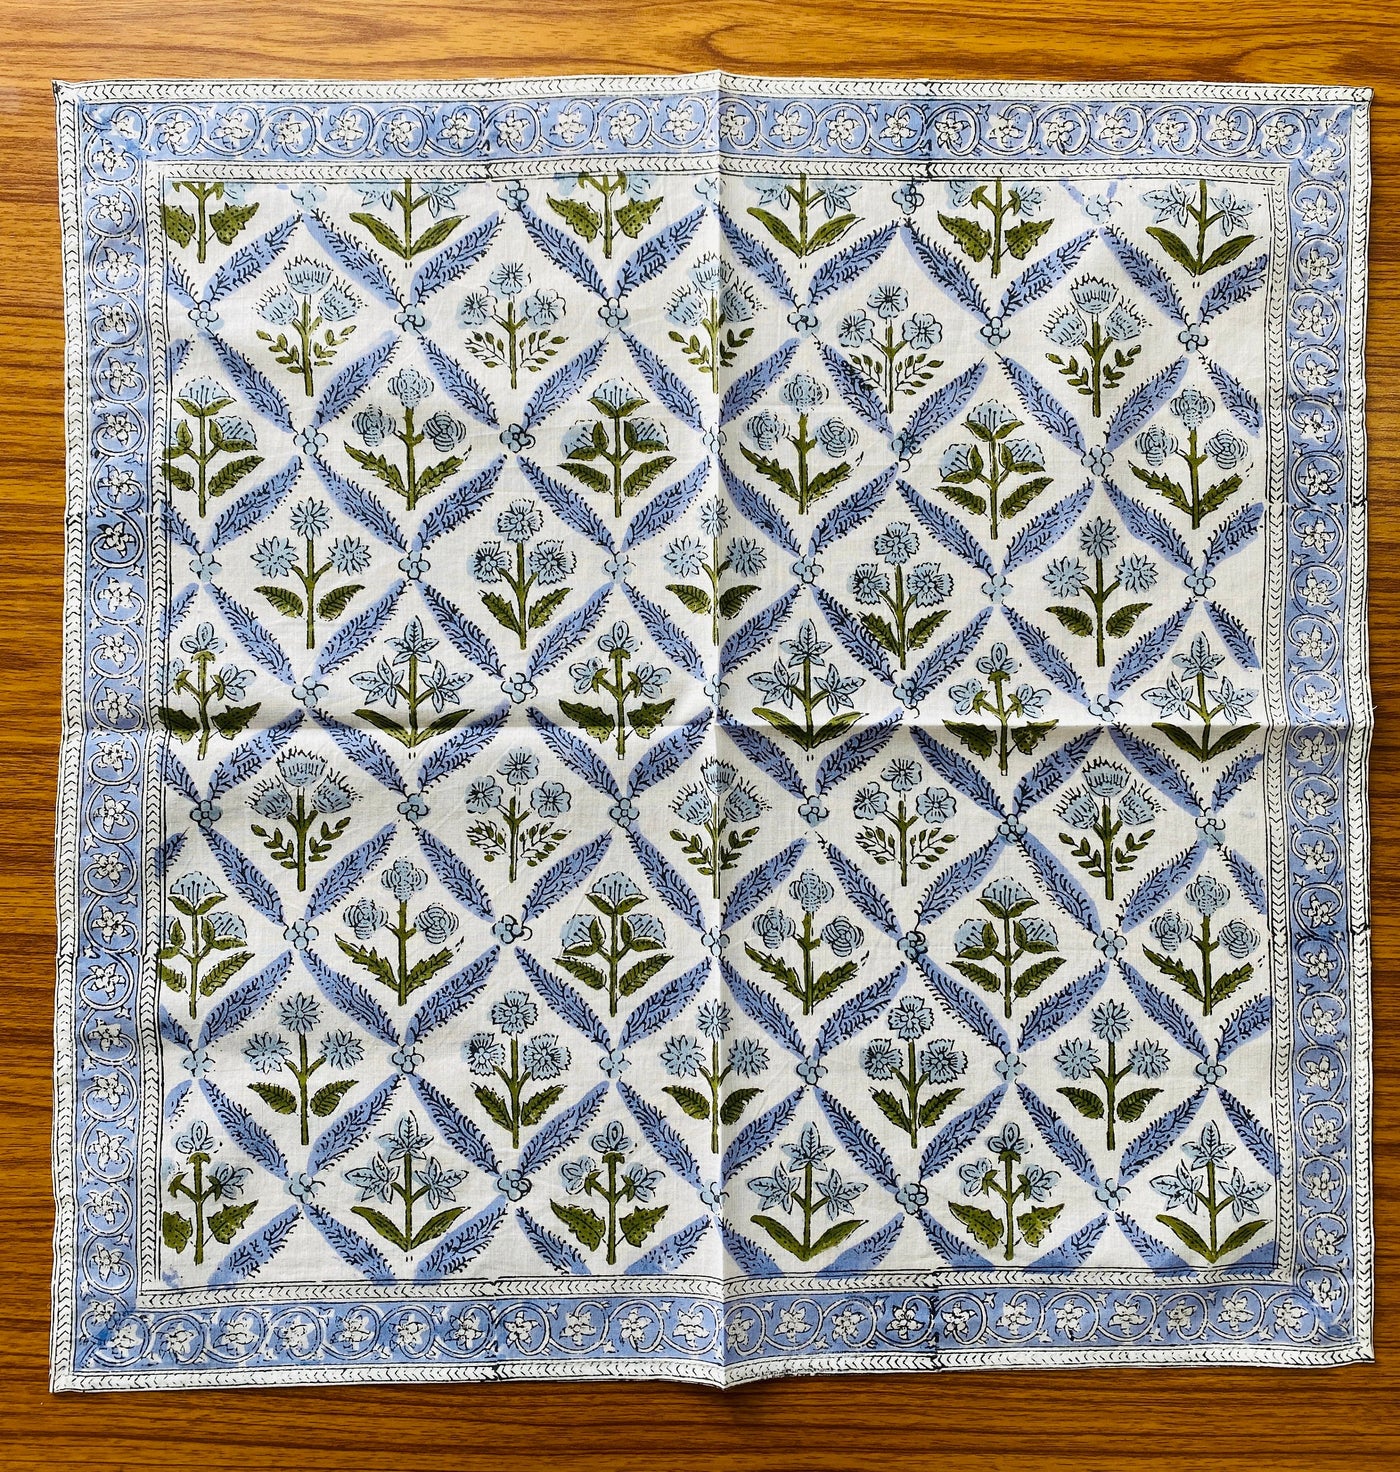 Light Steel Blue, Olive Green Indian Floral Hand Block Printed 100% Pure Cotton Cloth Napkins Size 20x20" Set of 4,6,12,24,48 Valentines Day